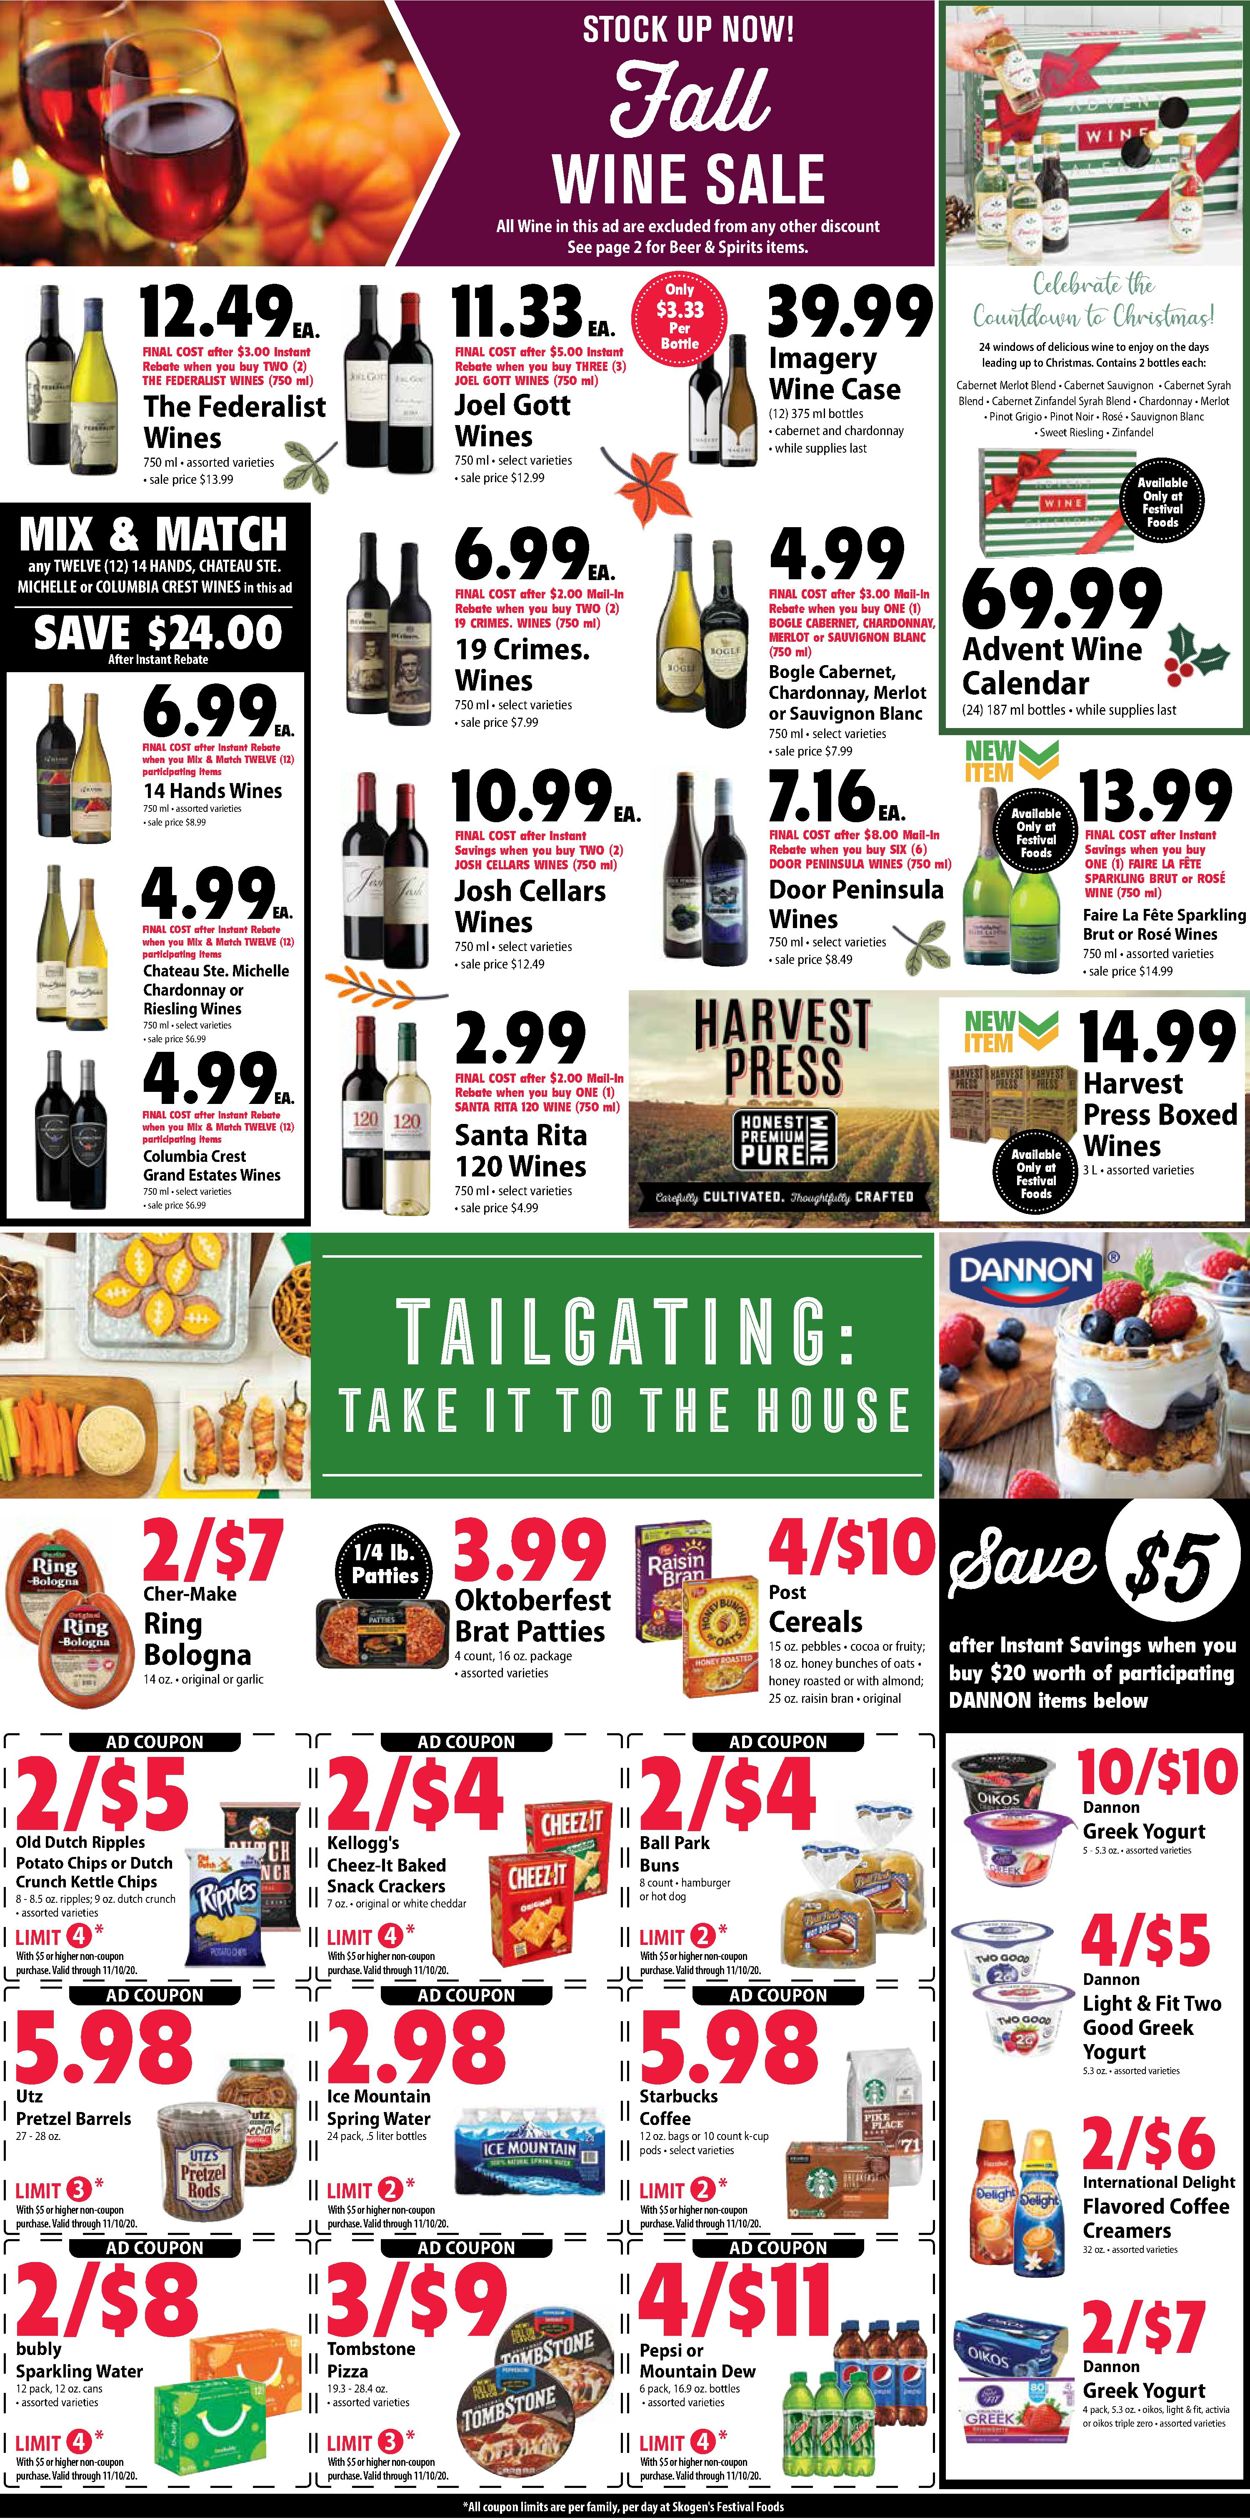 Festival Foods Current weekly ad 10/28 11/10/2020 [7]